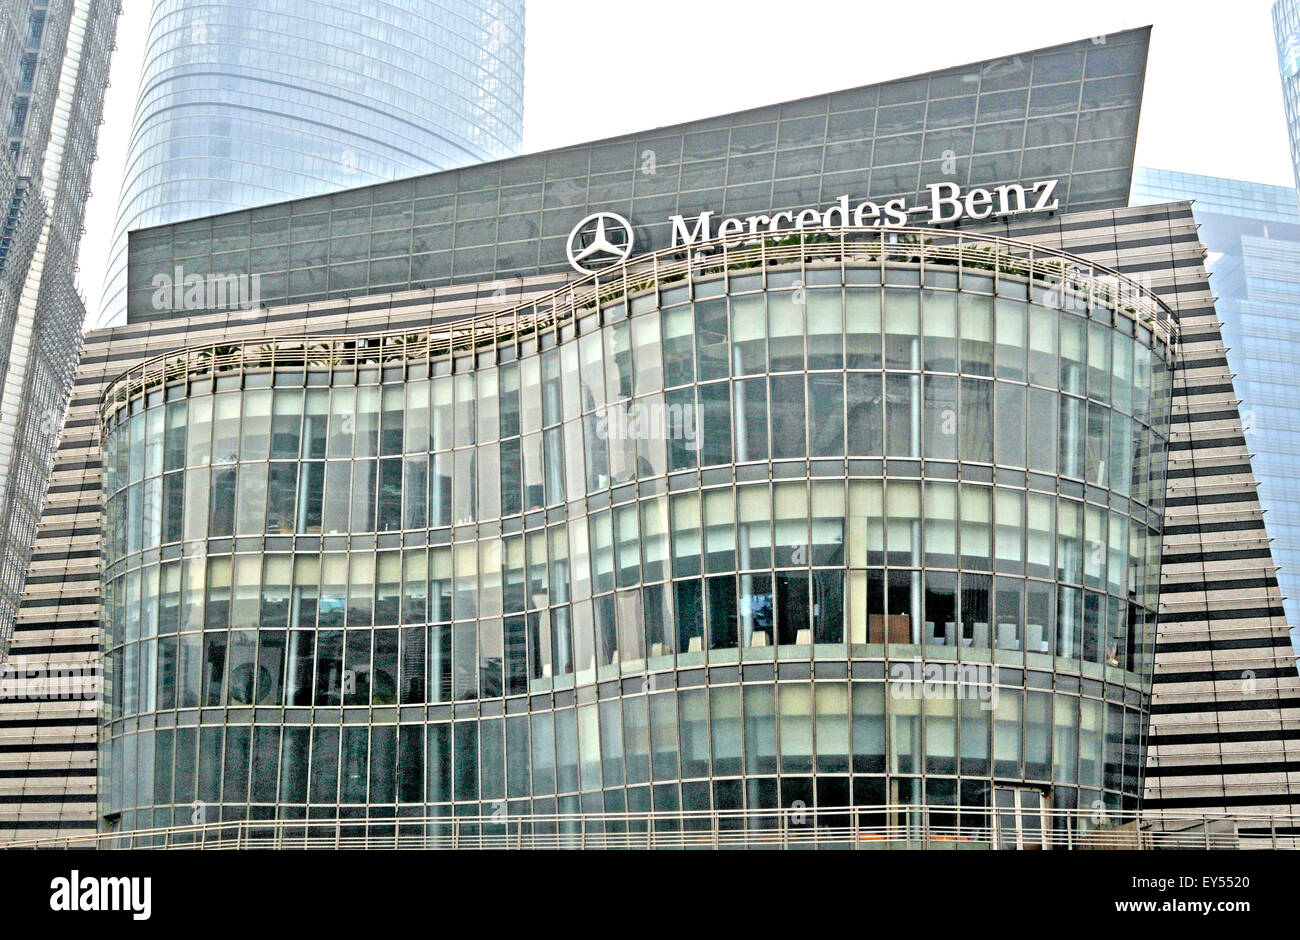 Mercedes-Benz office Pudong Shanghai China Stock Photo